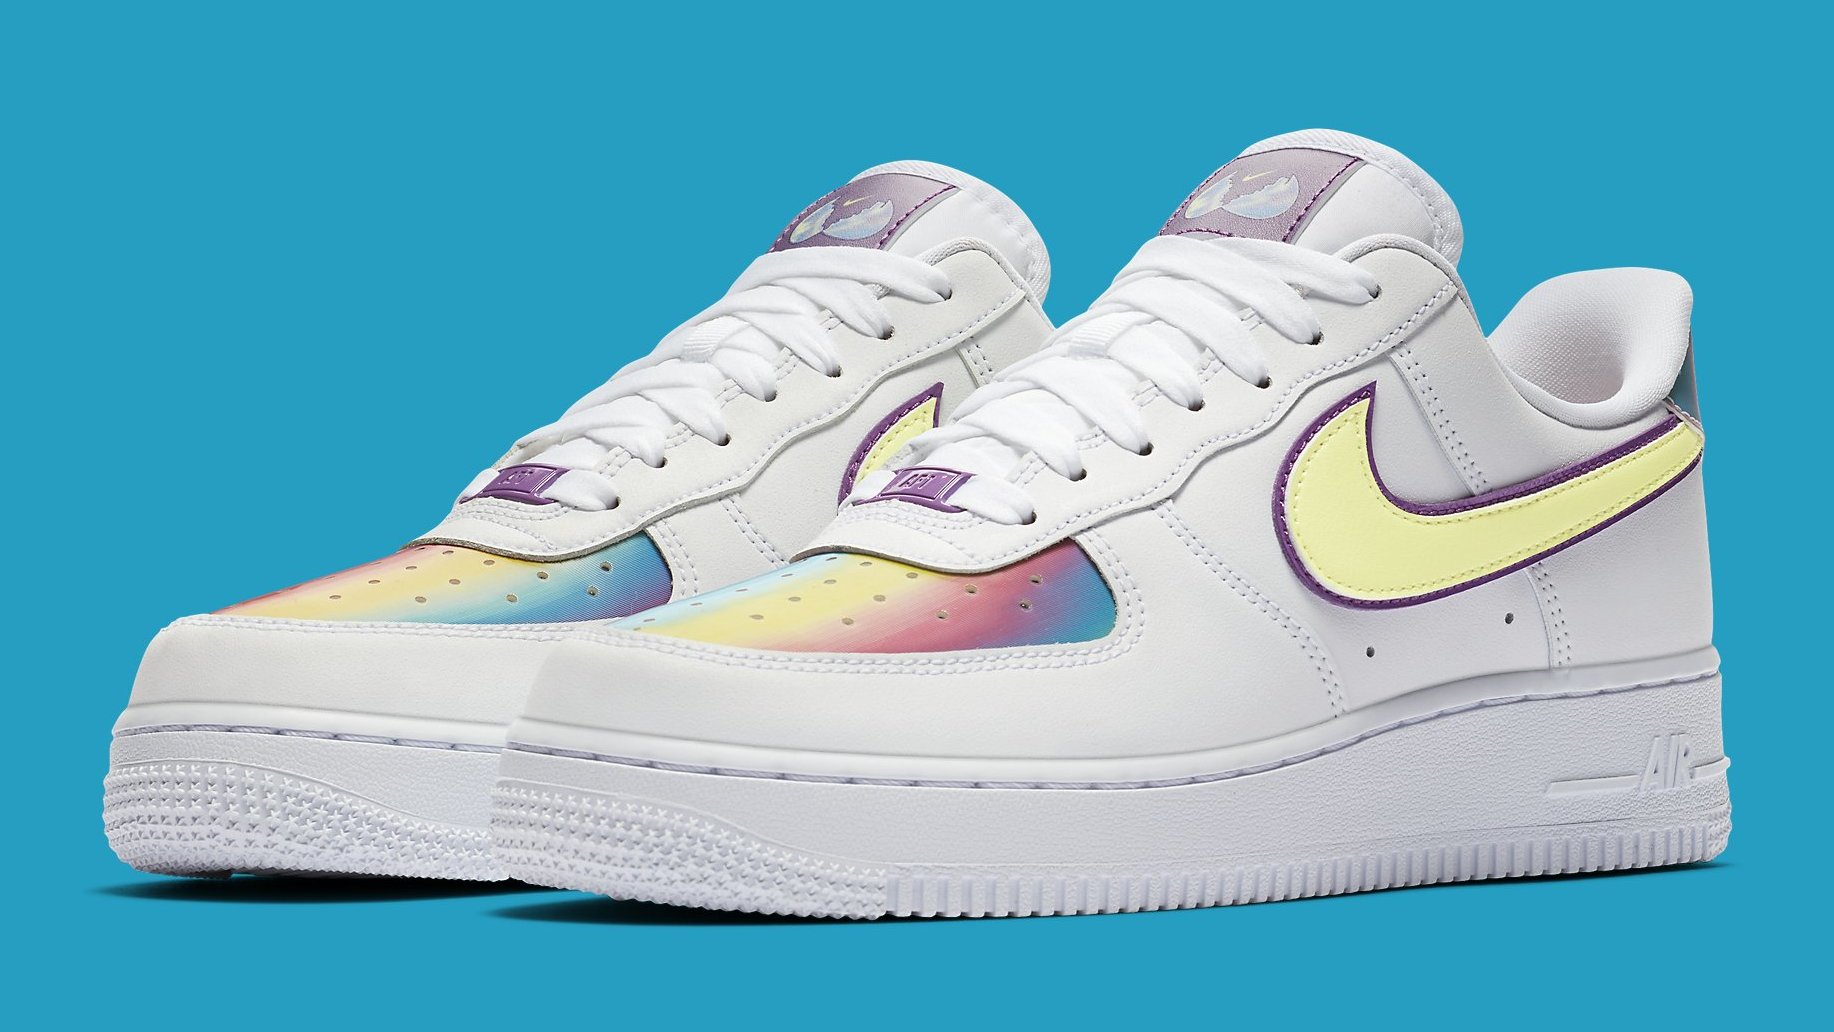 Nike Set to Release Another 'Easter' Air Force 1 Low Next Month